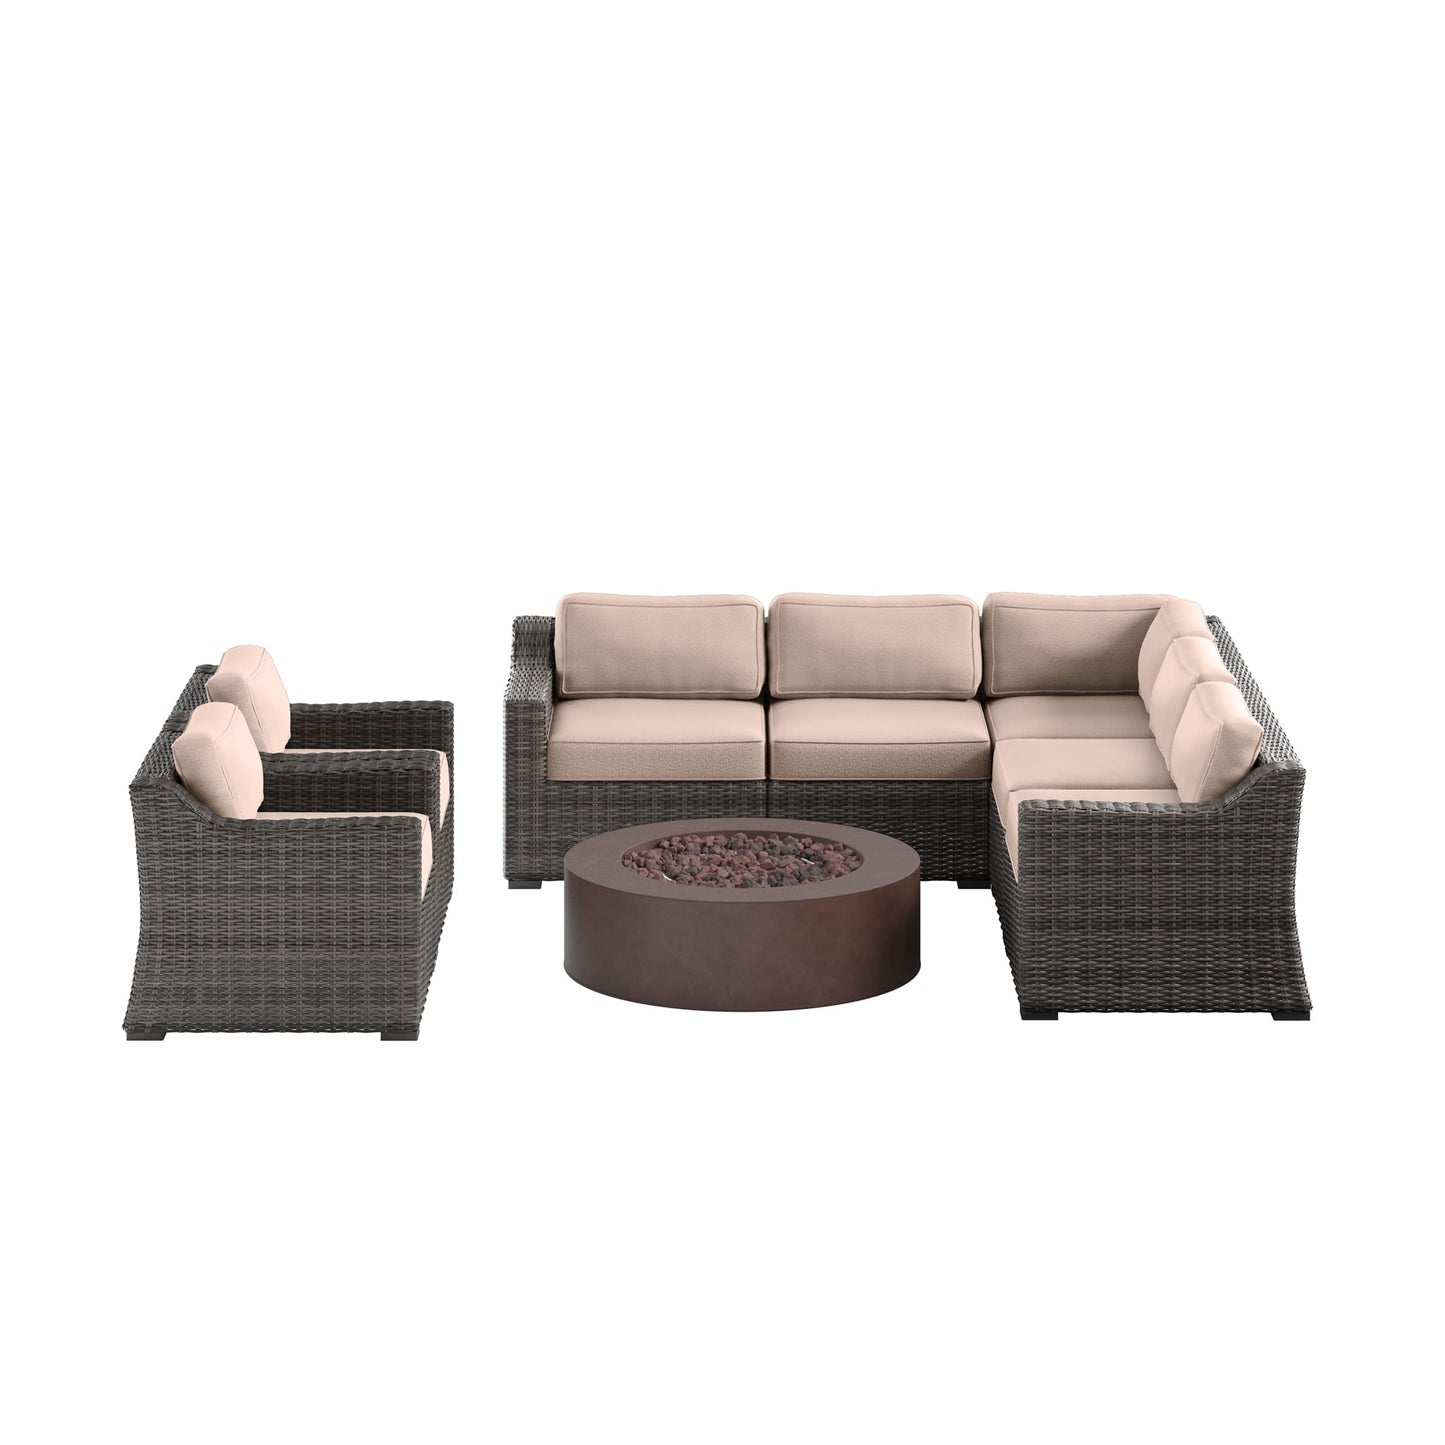 Bristol Wicker 7-Seat Sectional Set with Round Fire Pit